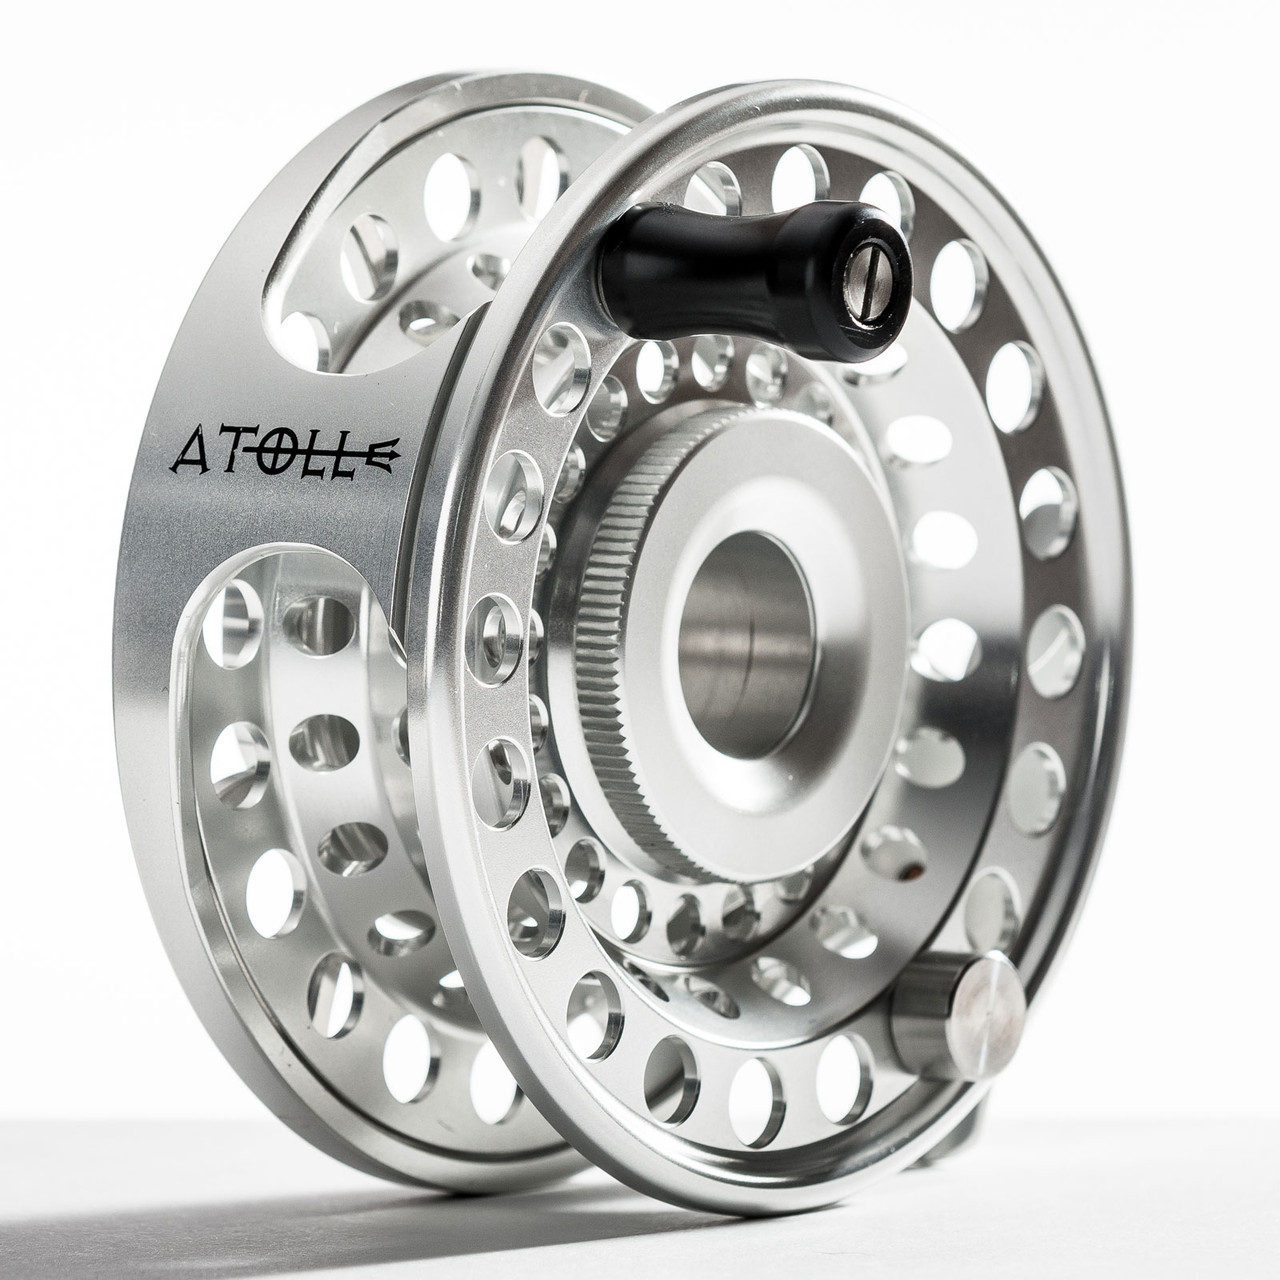 TFO Atoll Super Large Arbor Fly Reel - AvidMax